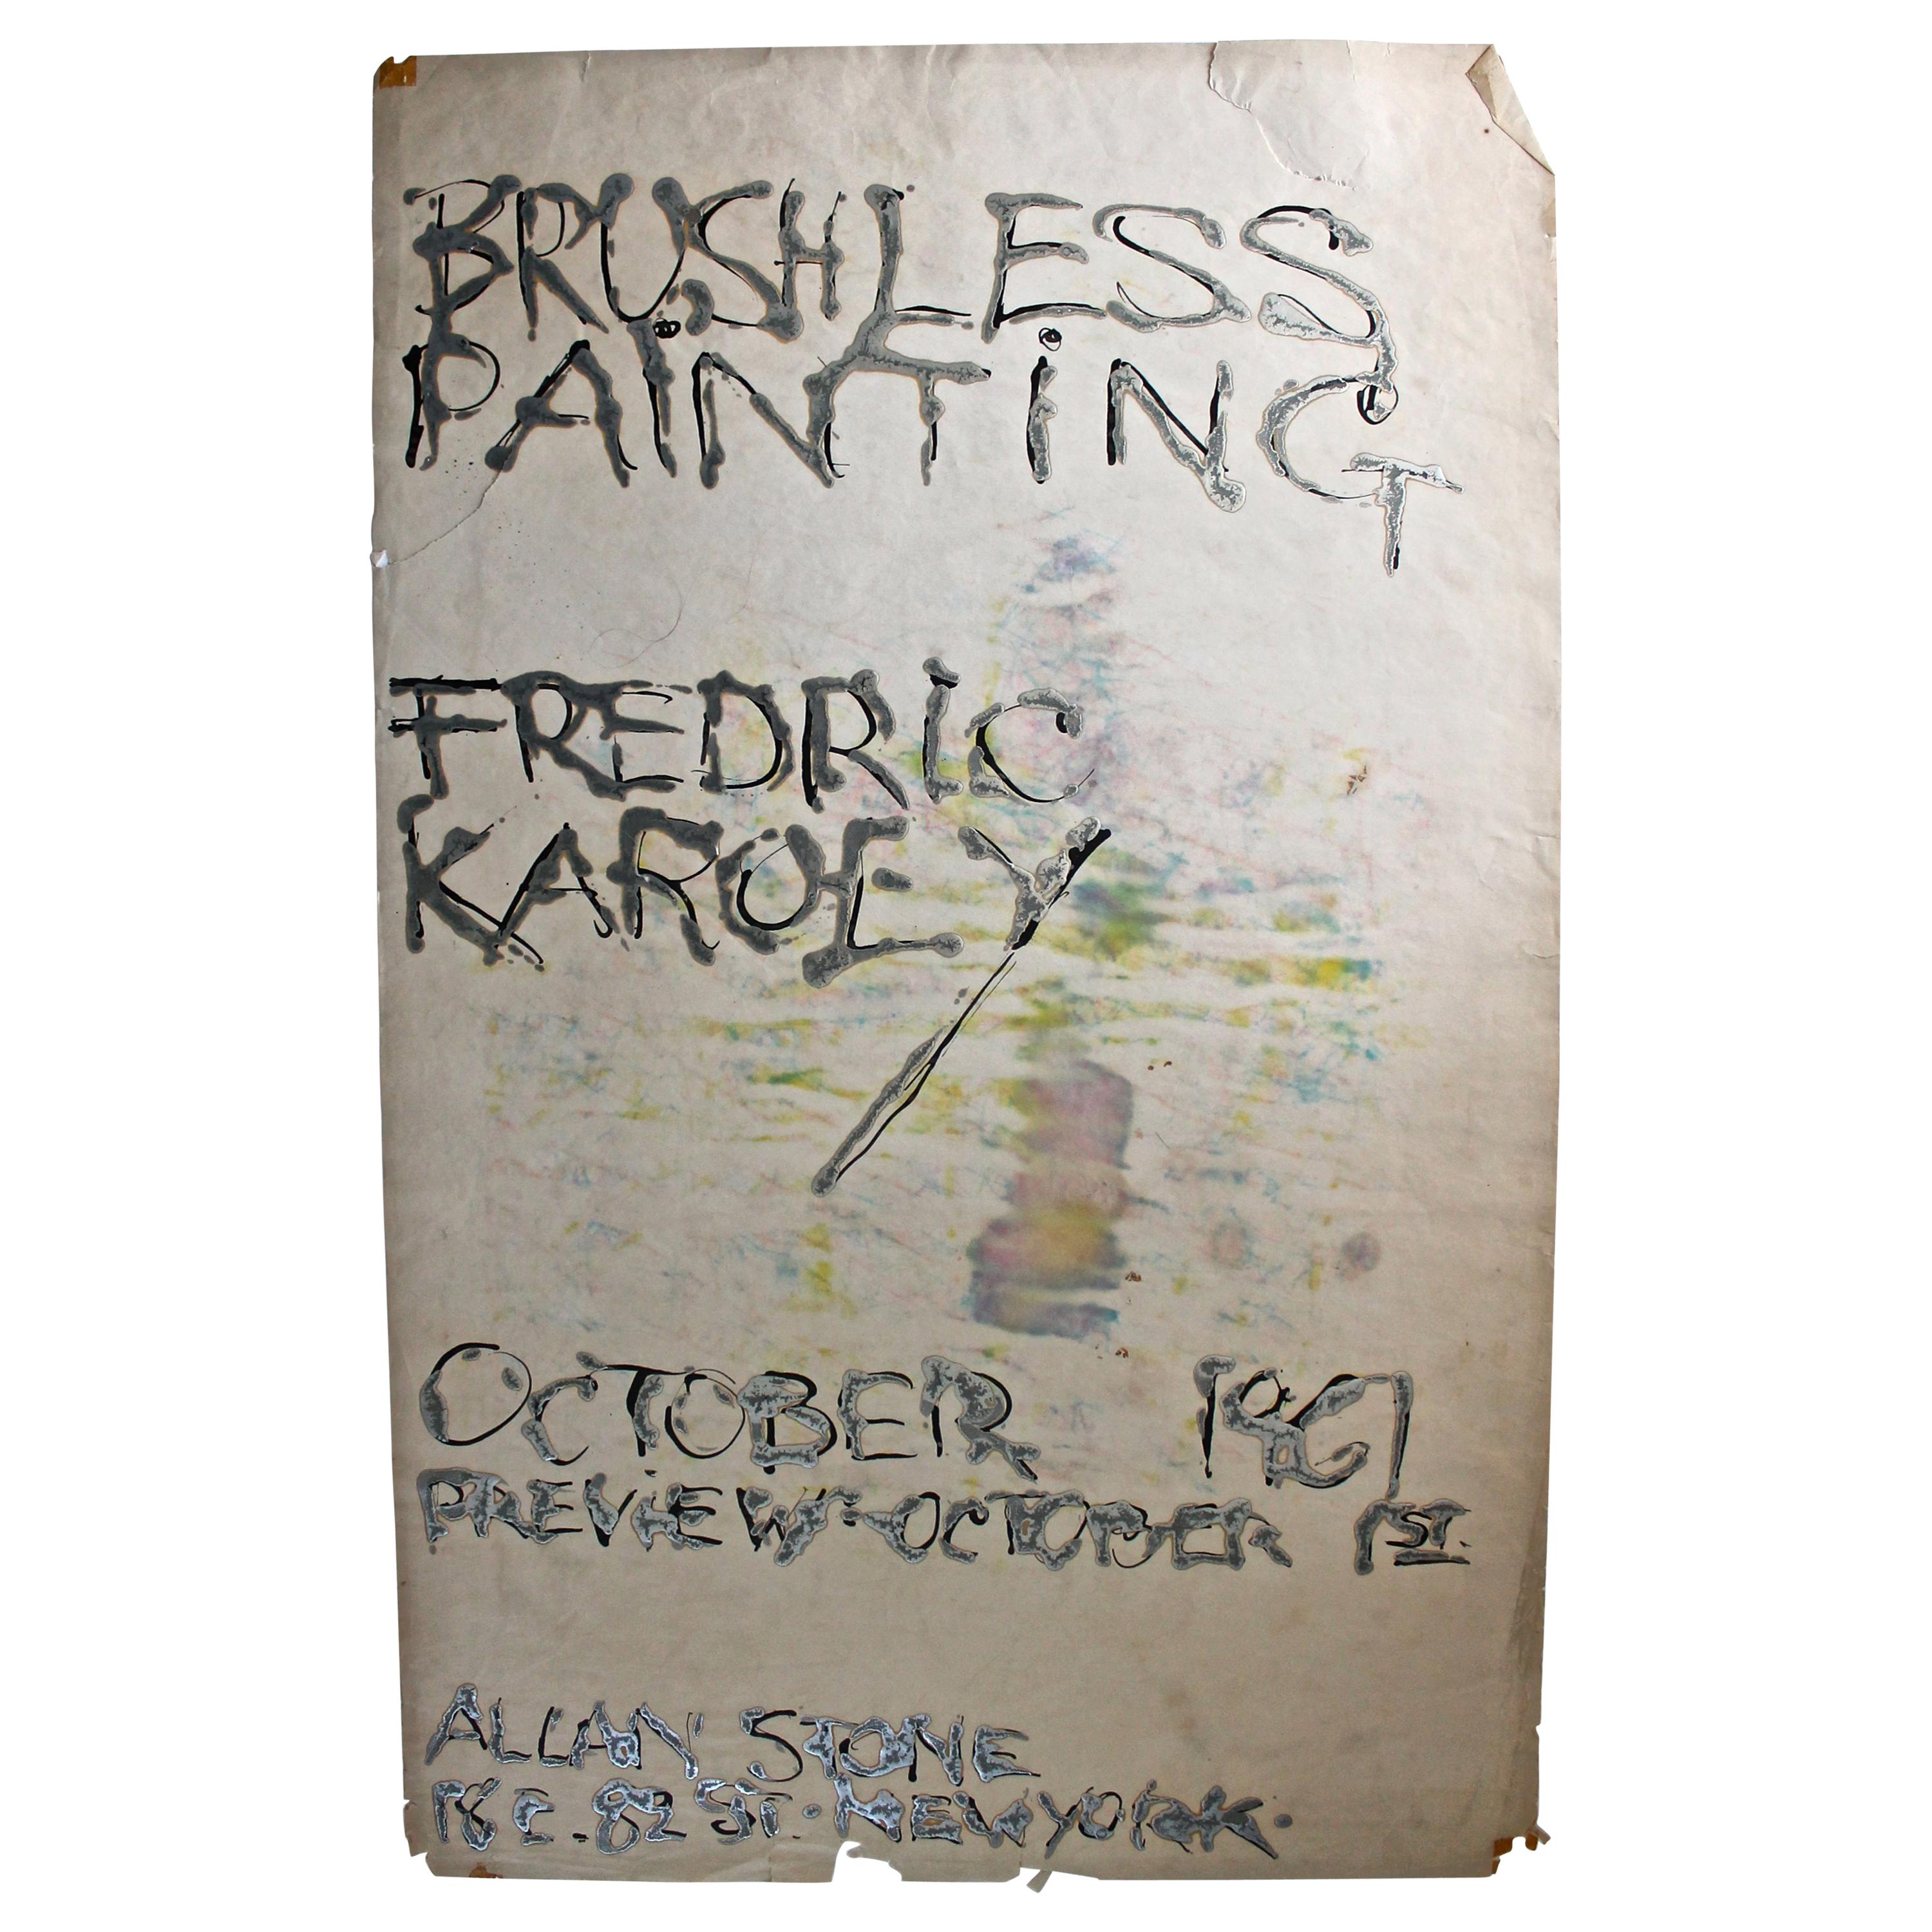 Fredric Karoly Abstract Expressionist 1961 Allan Stone Gallery Poster Drawing For Sale